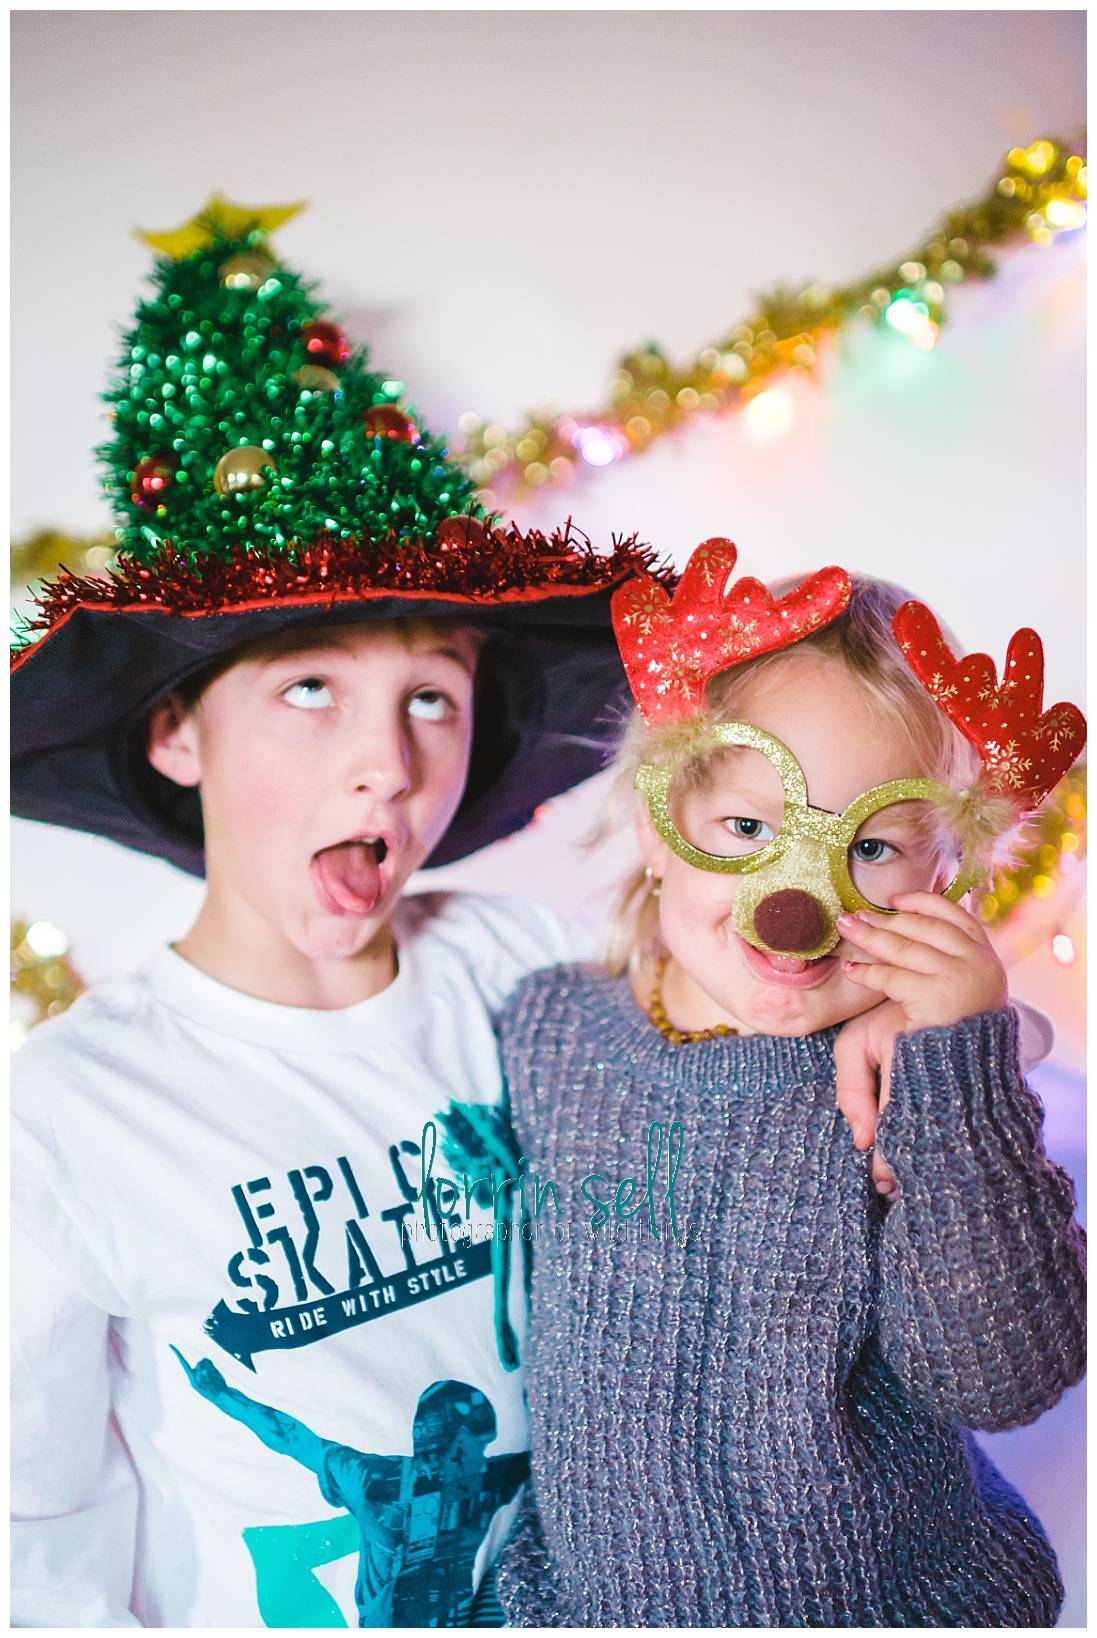 Photo booths are so much fun! You can easily make your own and add even more fun to your Christmas party!